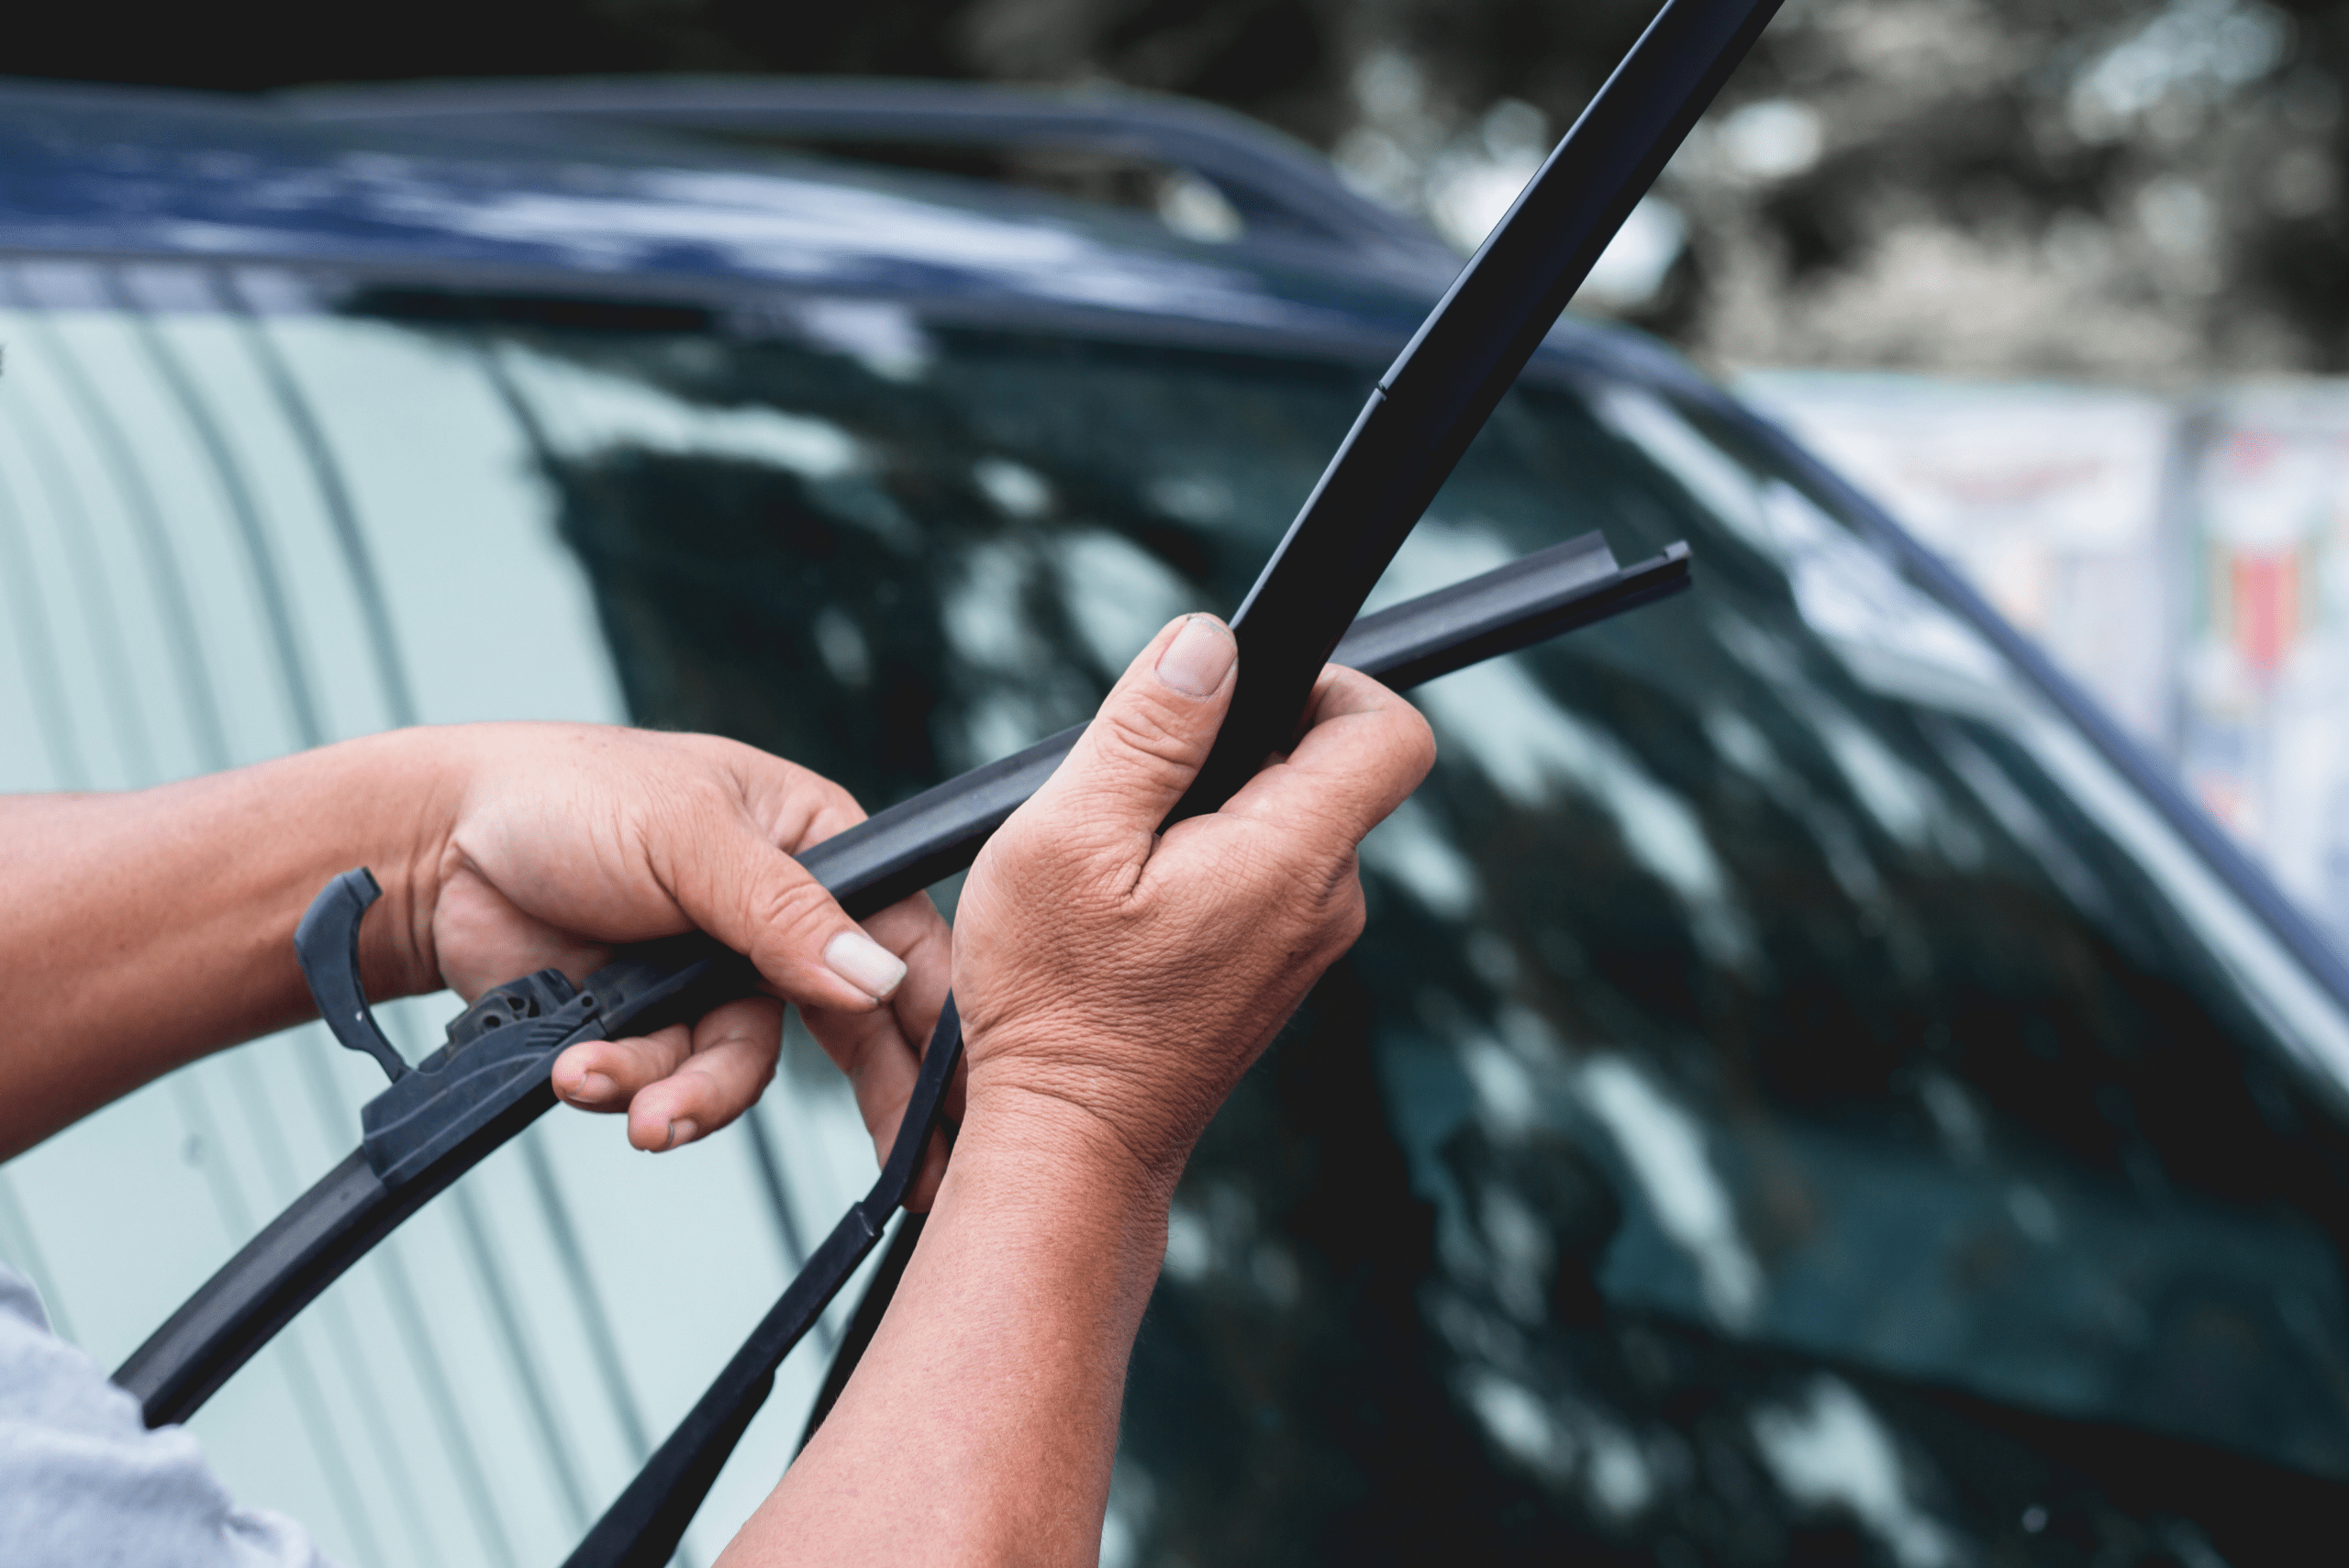 Securing the new wiper blade back onto the wiper arm.